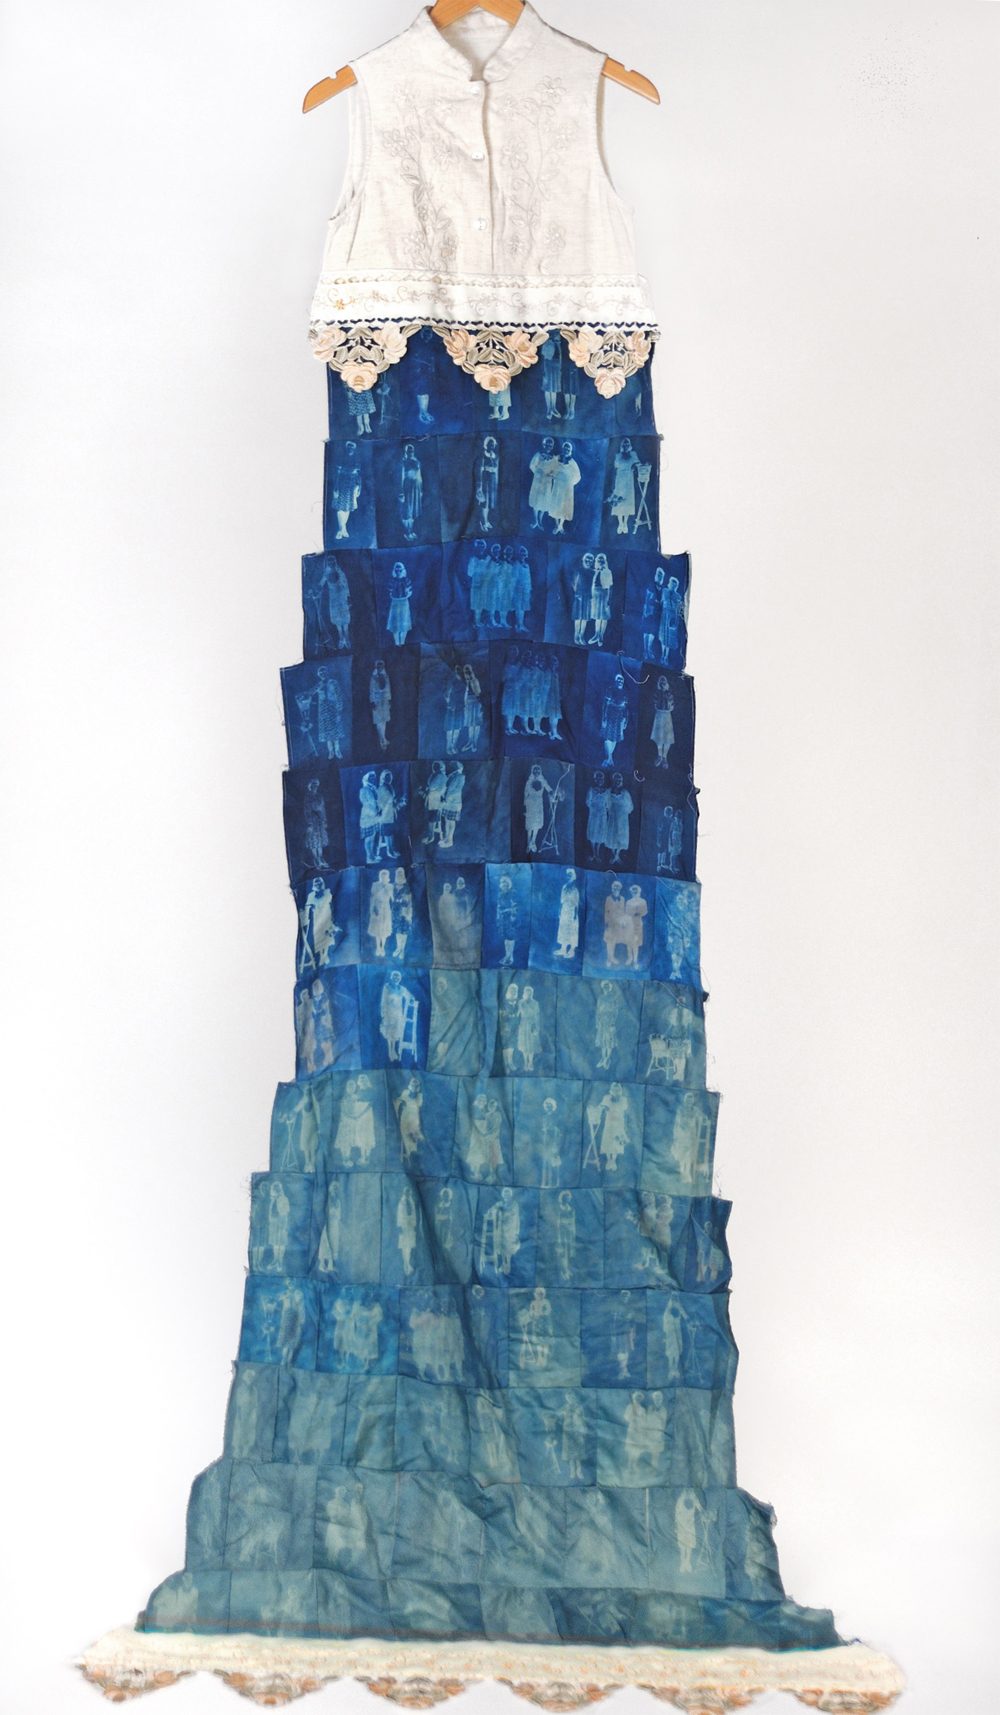 A dress with a white top, and skirt constructed of rows of cyanotypes of illegible figures